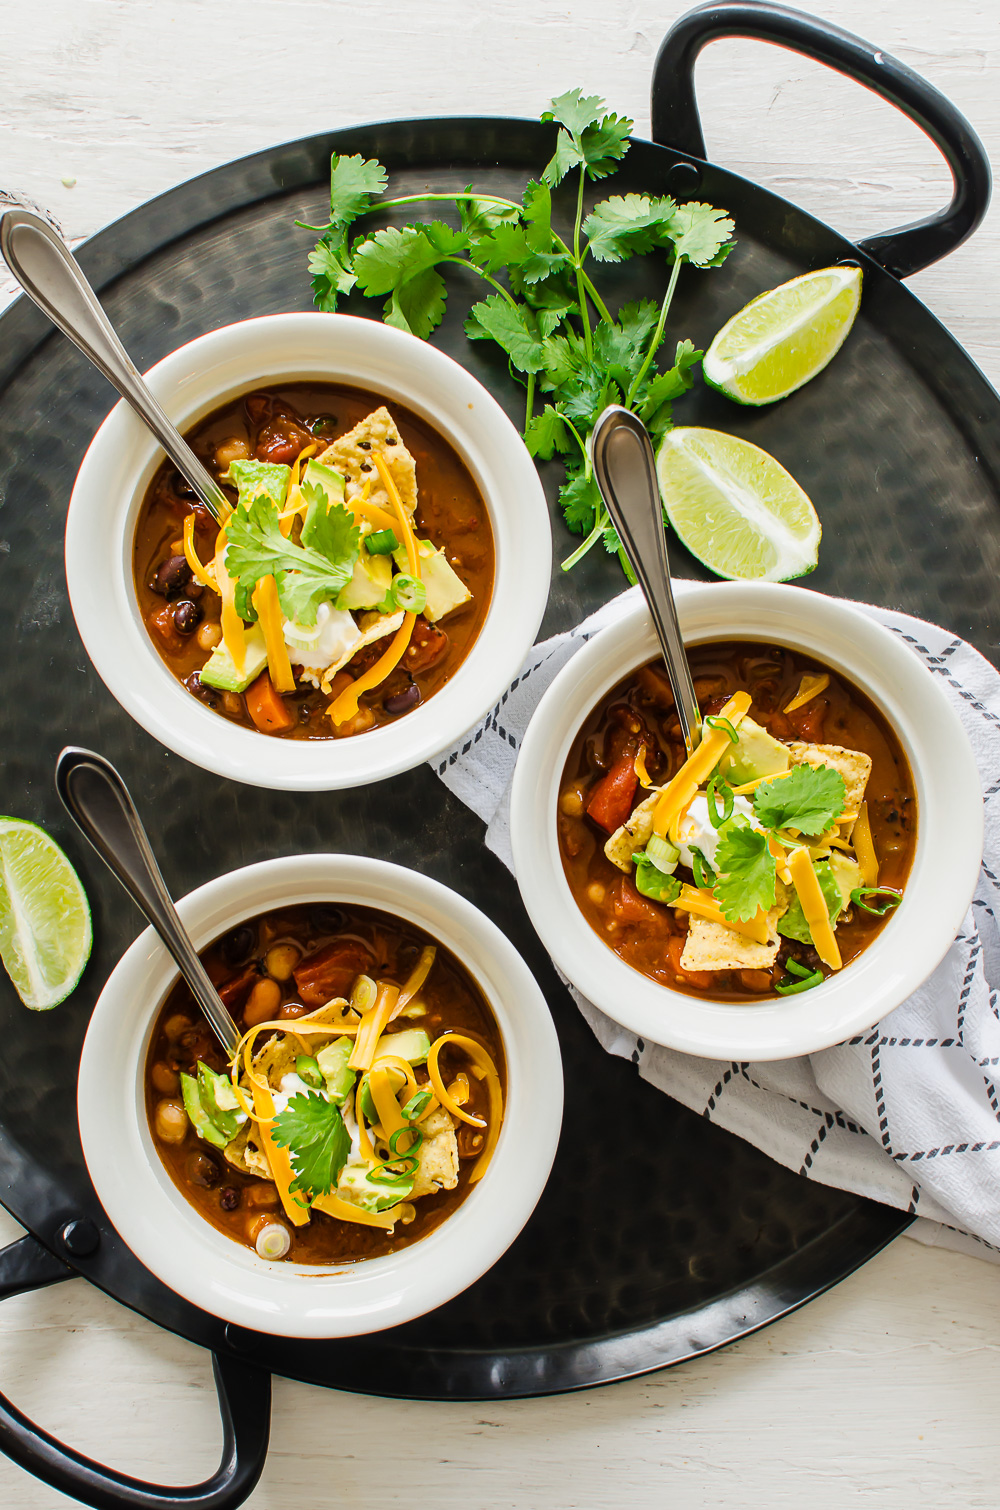 3 bowls of chili with toppings like tortilla chips, avocado, cilantro, lime wedges, and cheese